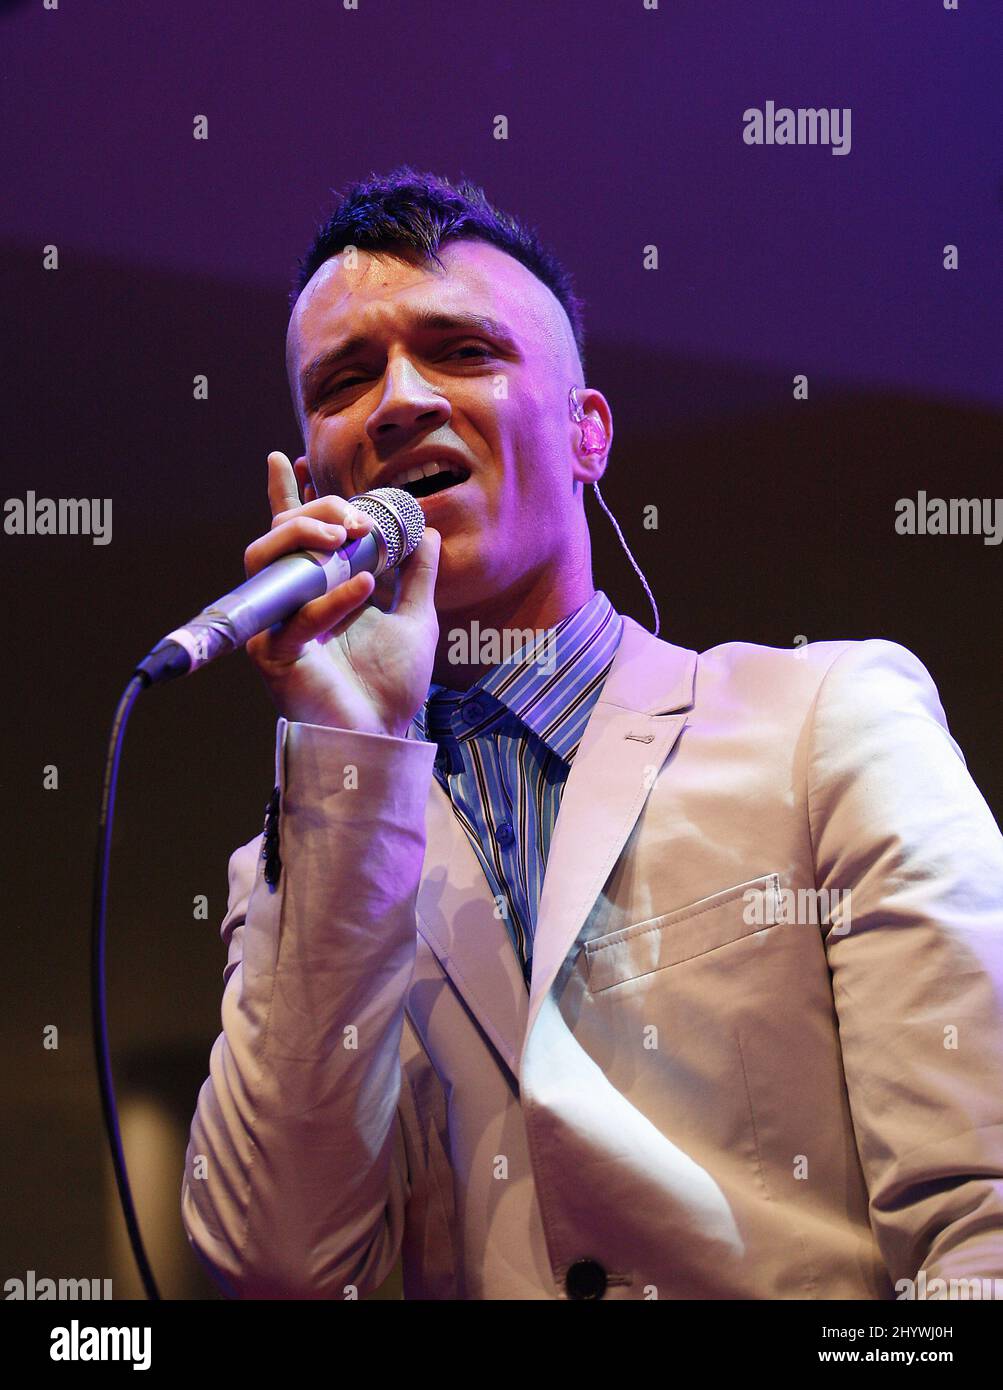 FrankMusik performs a free gig at the Westfield Shopping Centre in London as part of a series of summer gigs. Stock Photo